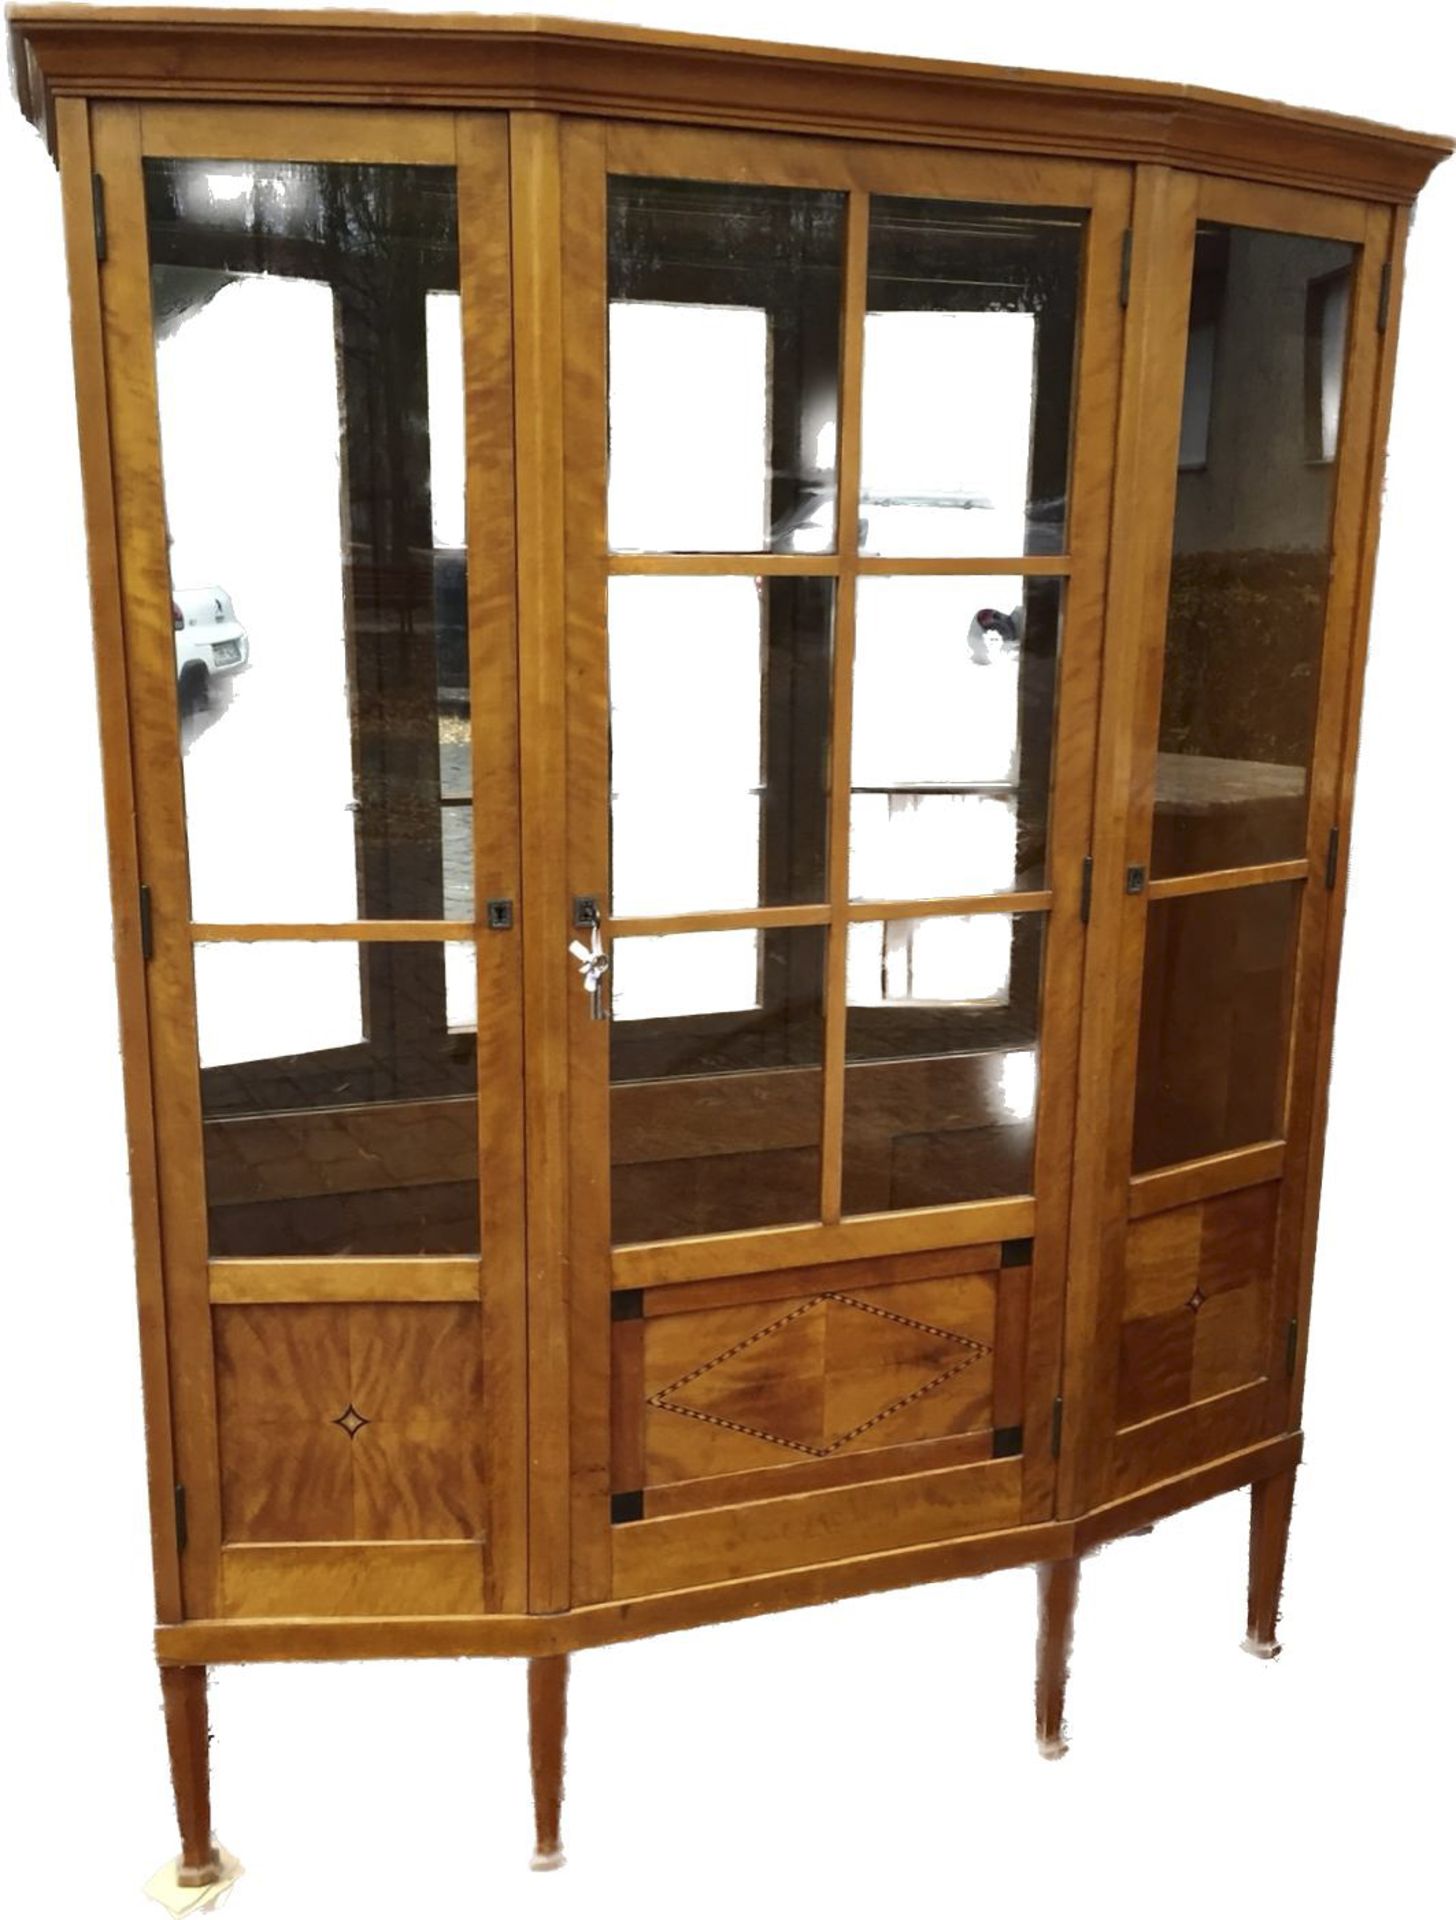 Glass cabinet in Biedermeier style around 1900/1910, mirrored back wall, 170 x 140 x 45 cm - The - Image 2 of 2